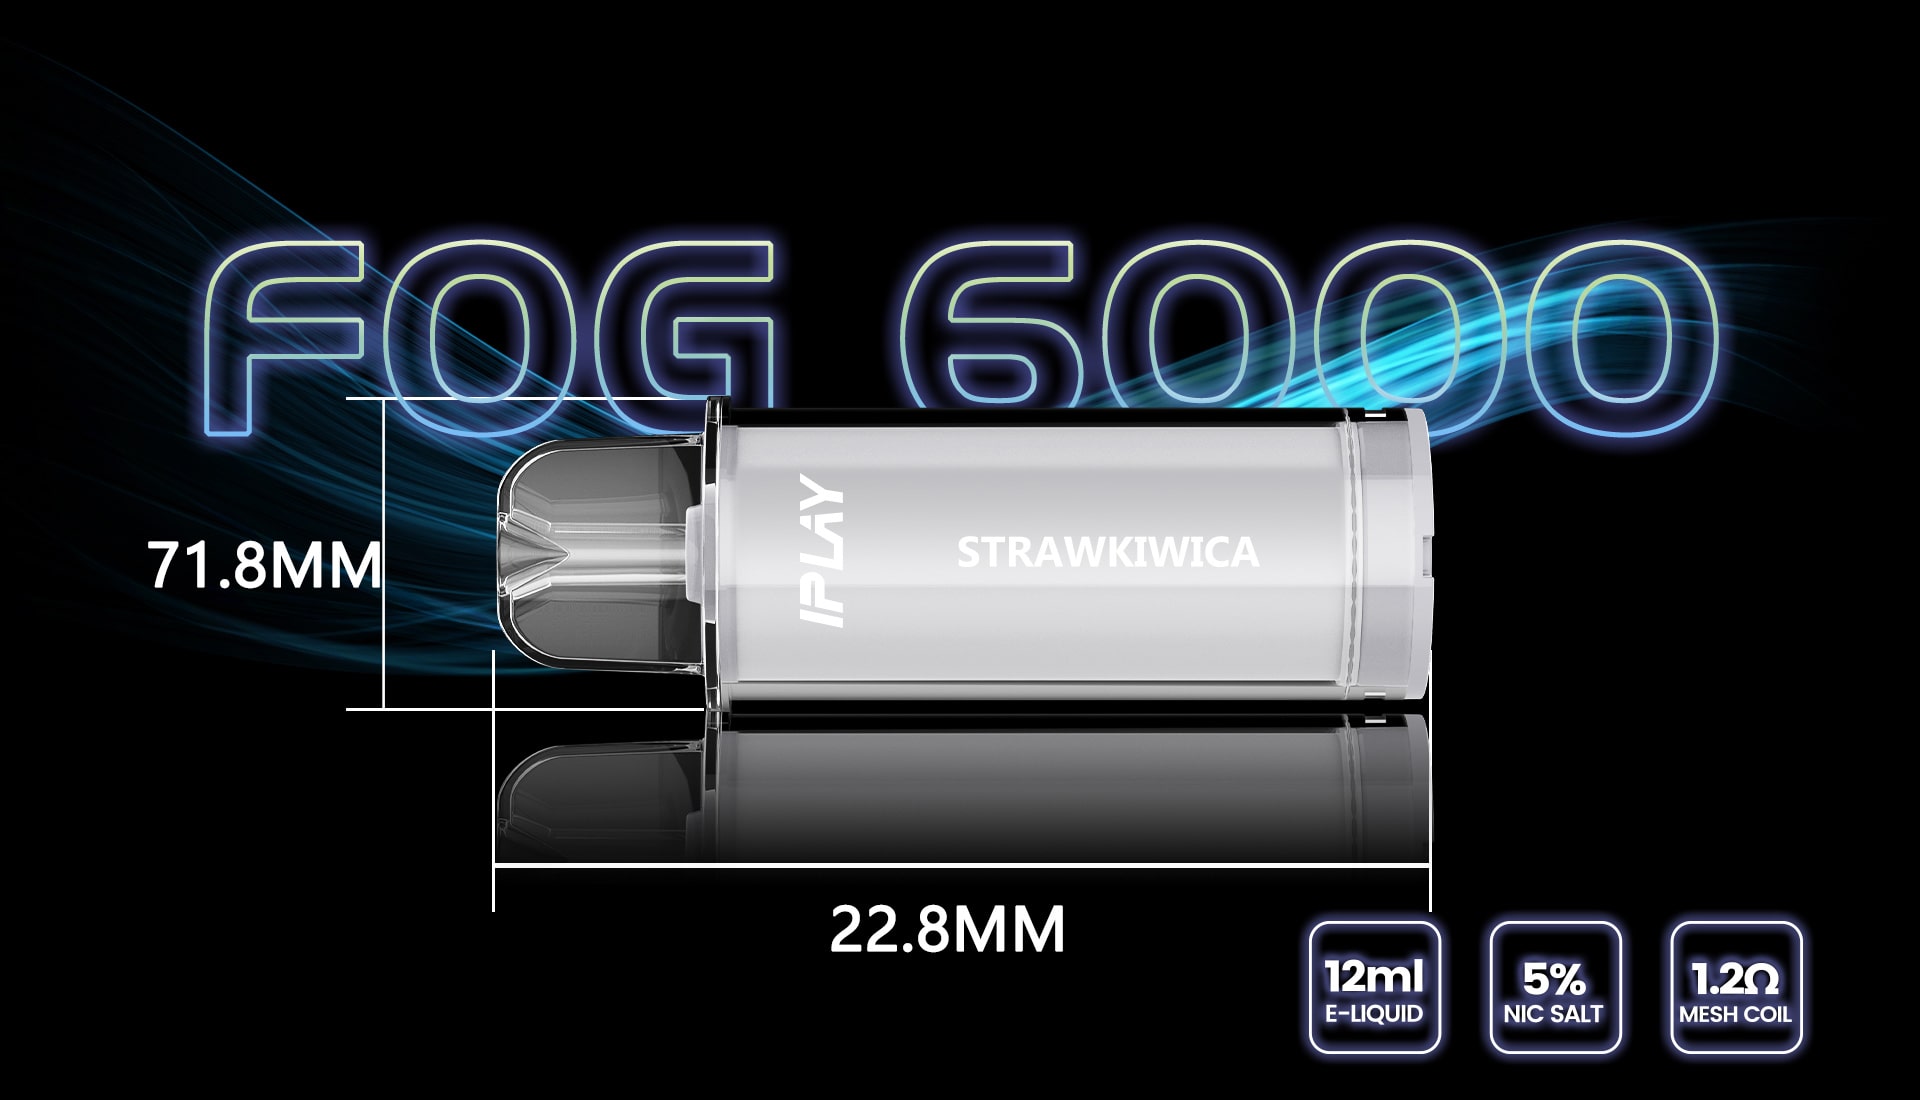 Fog 6000 Puffs Prefilled Pods: Hands On Review